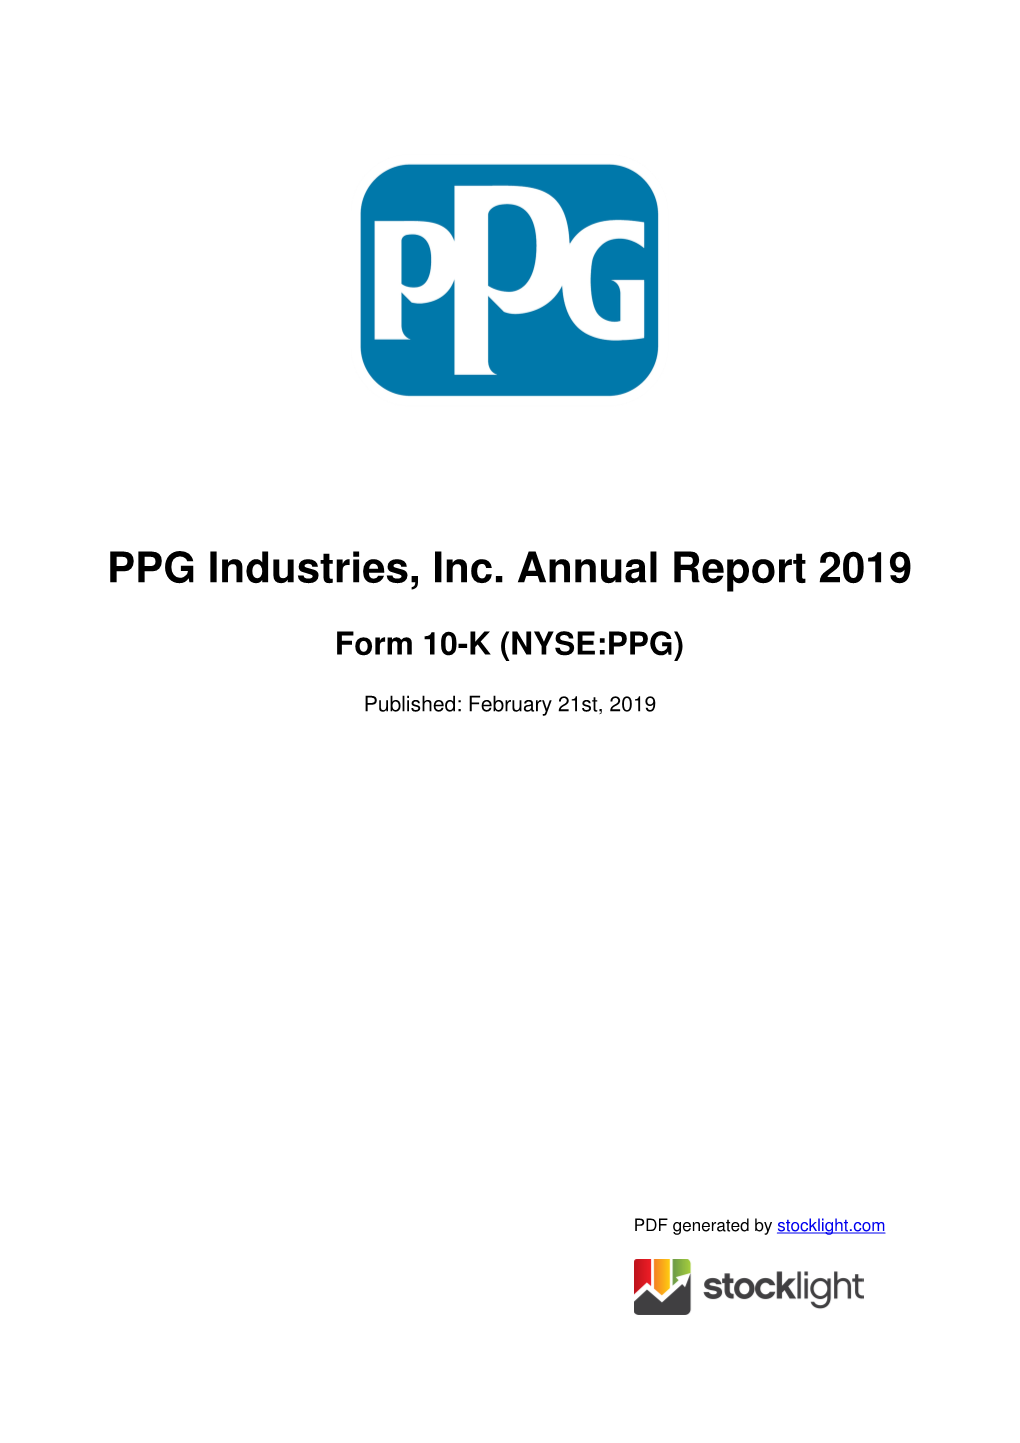 PPG Industries, Inc. Annual Report 2019